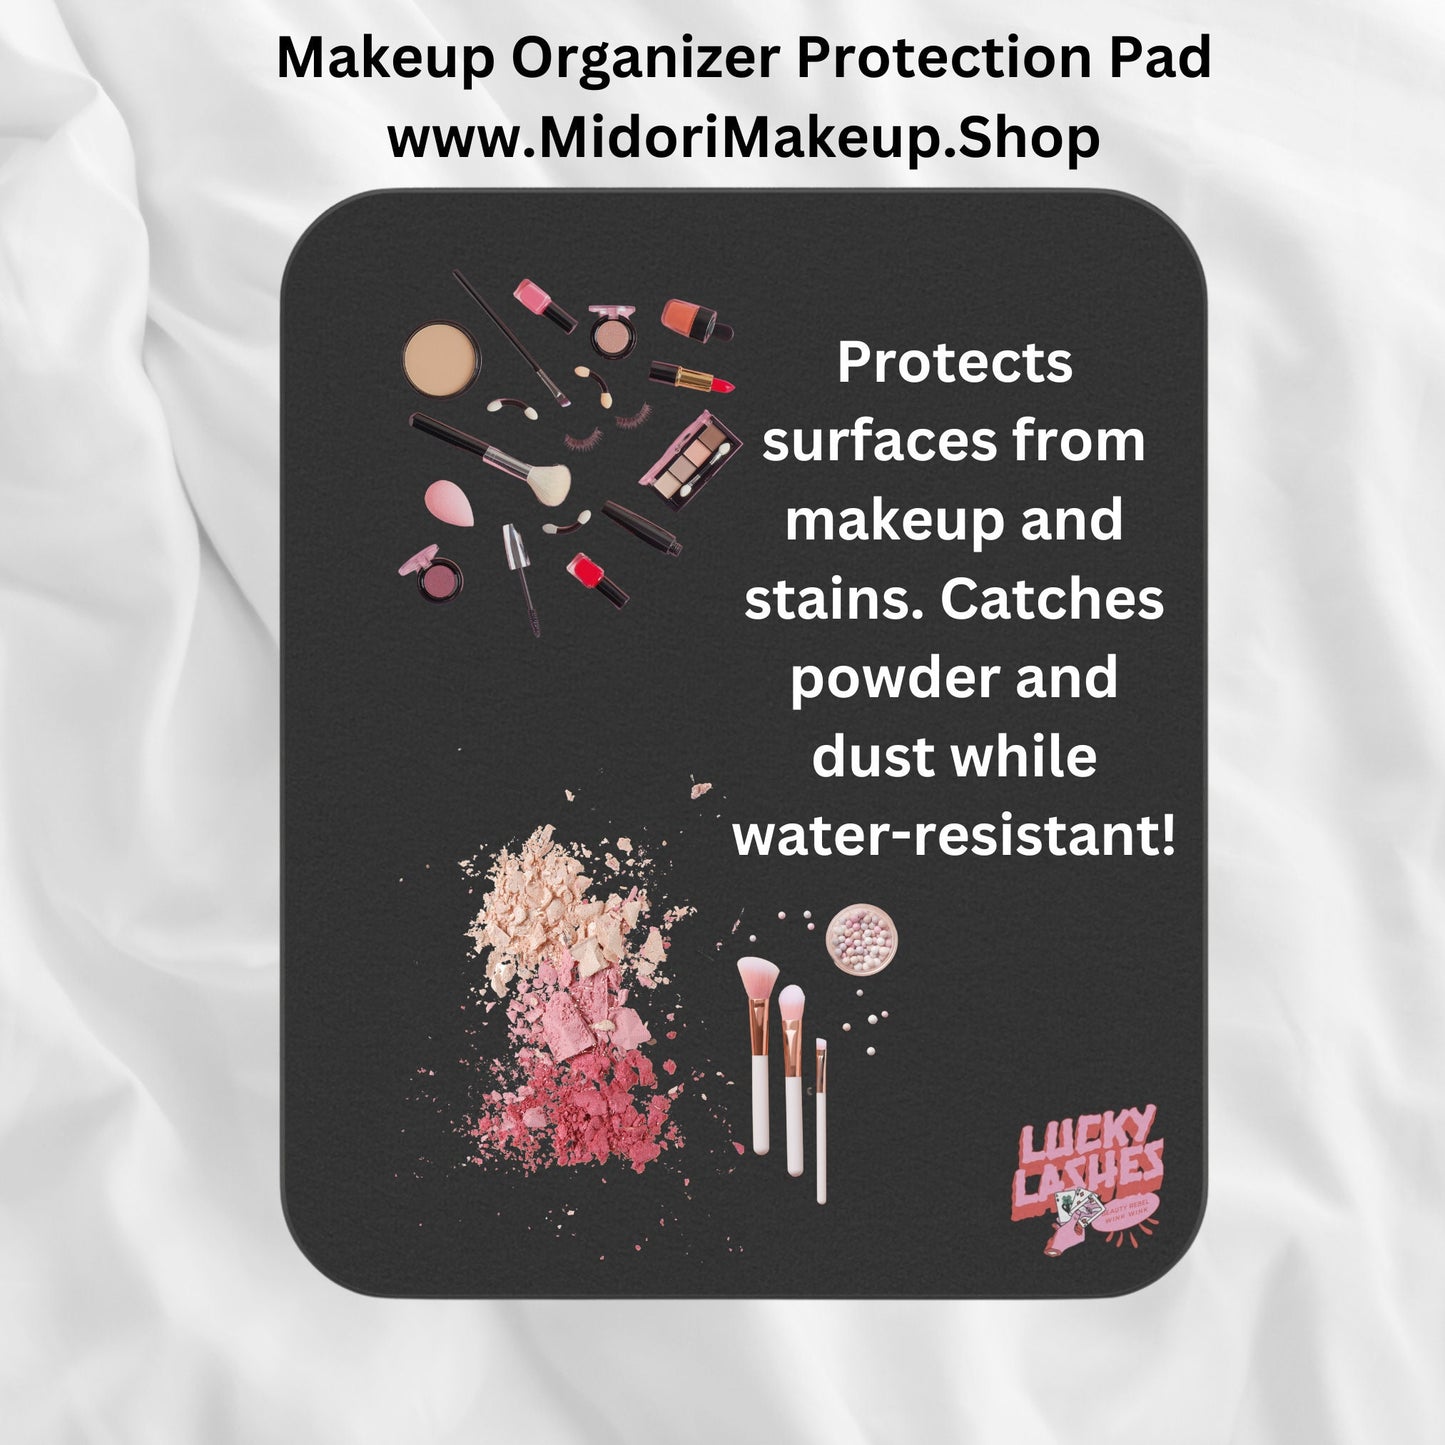 Makeup Artist Organizer Travel Layout Protection Pad, Freelance MUA Kit Tool, Water-Resistant Blanket, Protect Surfaces from Makeup